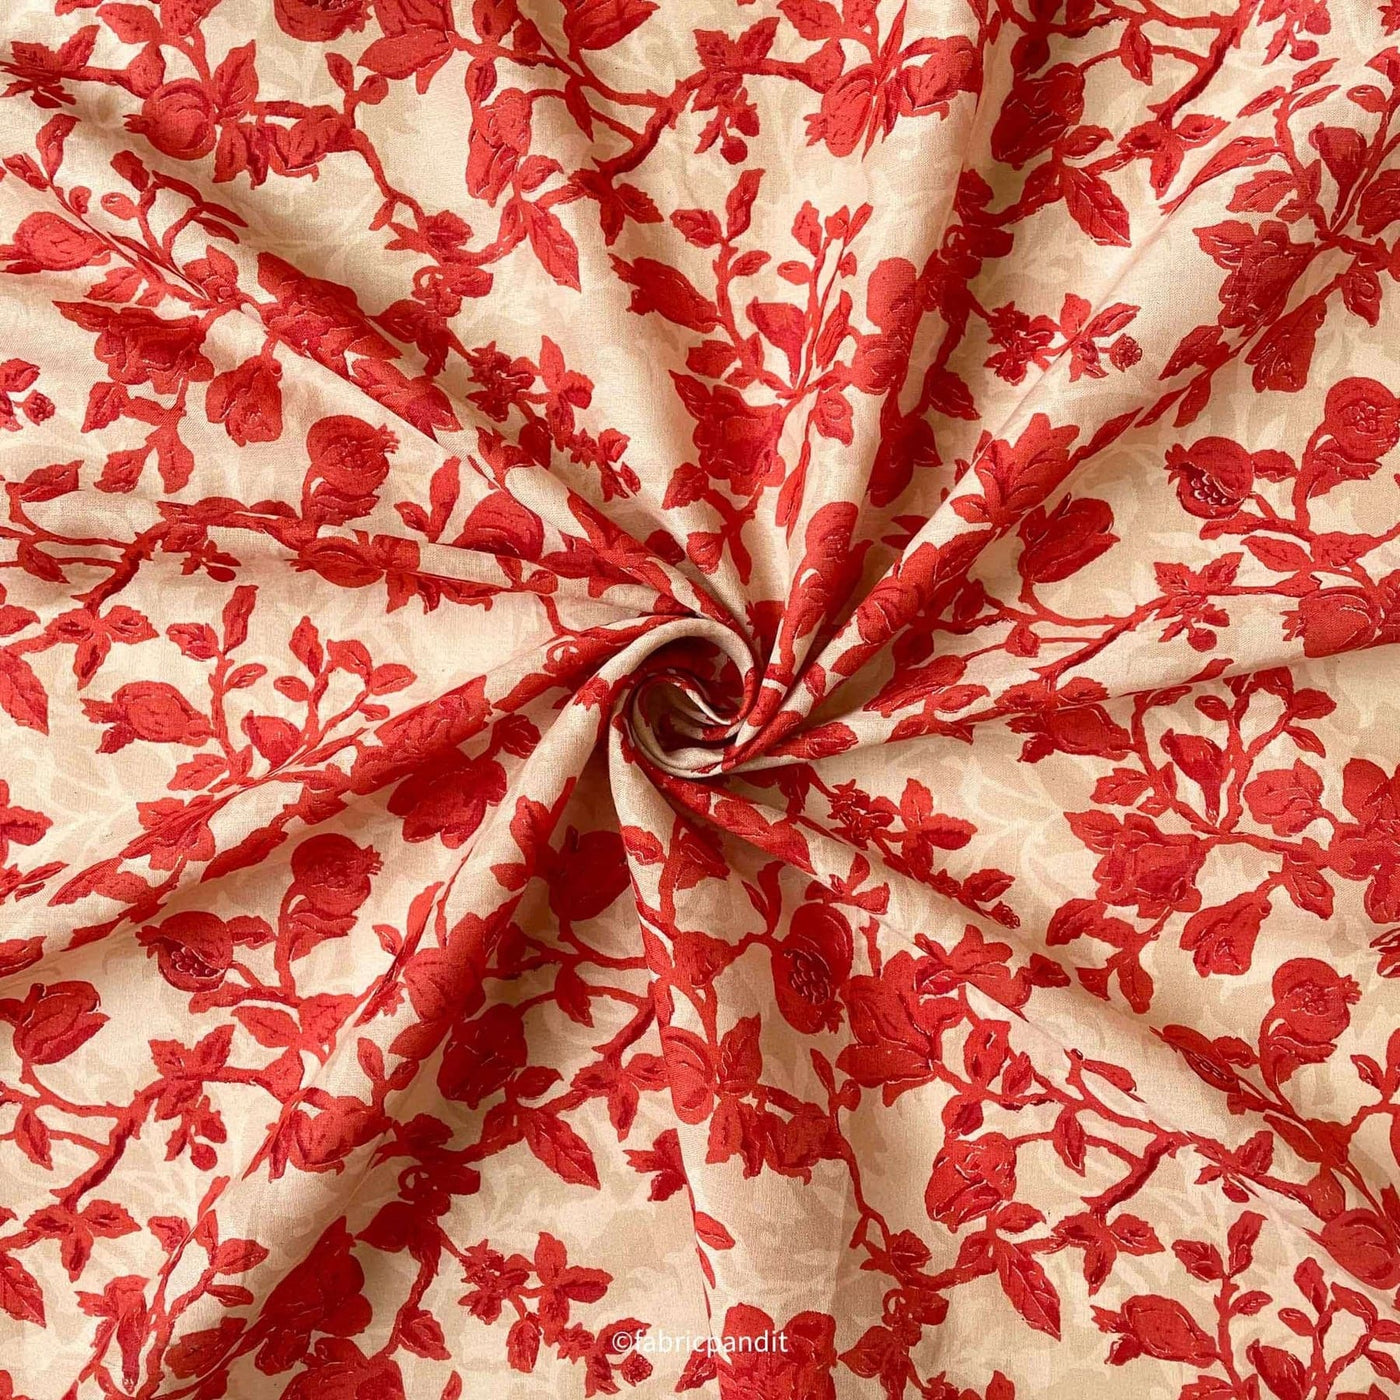 Fabric Pandit Fabric Beige & Maroon Pomegranate Garden Hand Block Printed Pure Mul Cotton Fabric (Width 42 Inches)